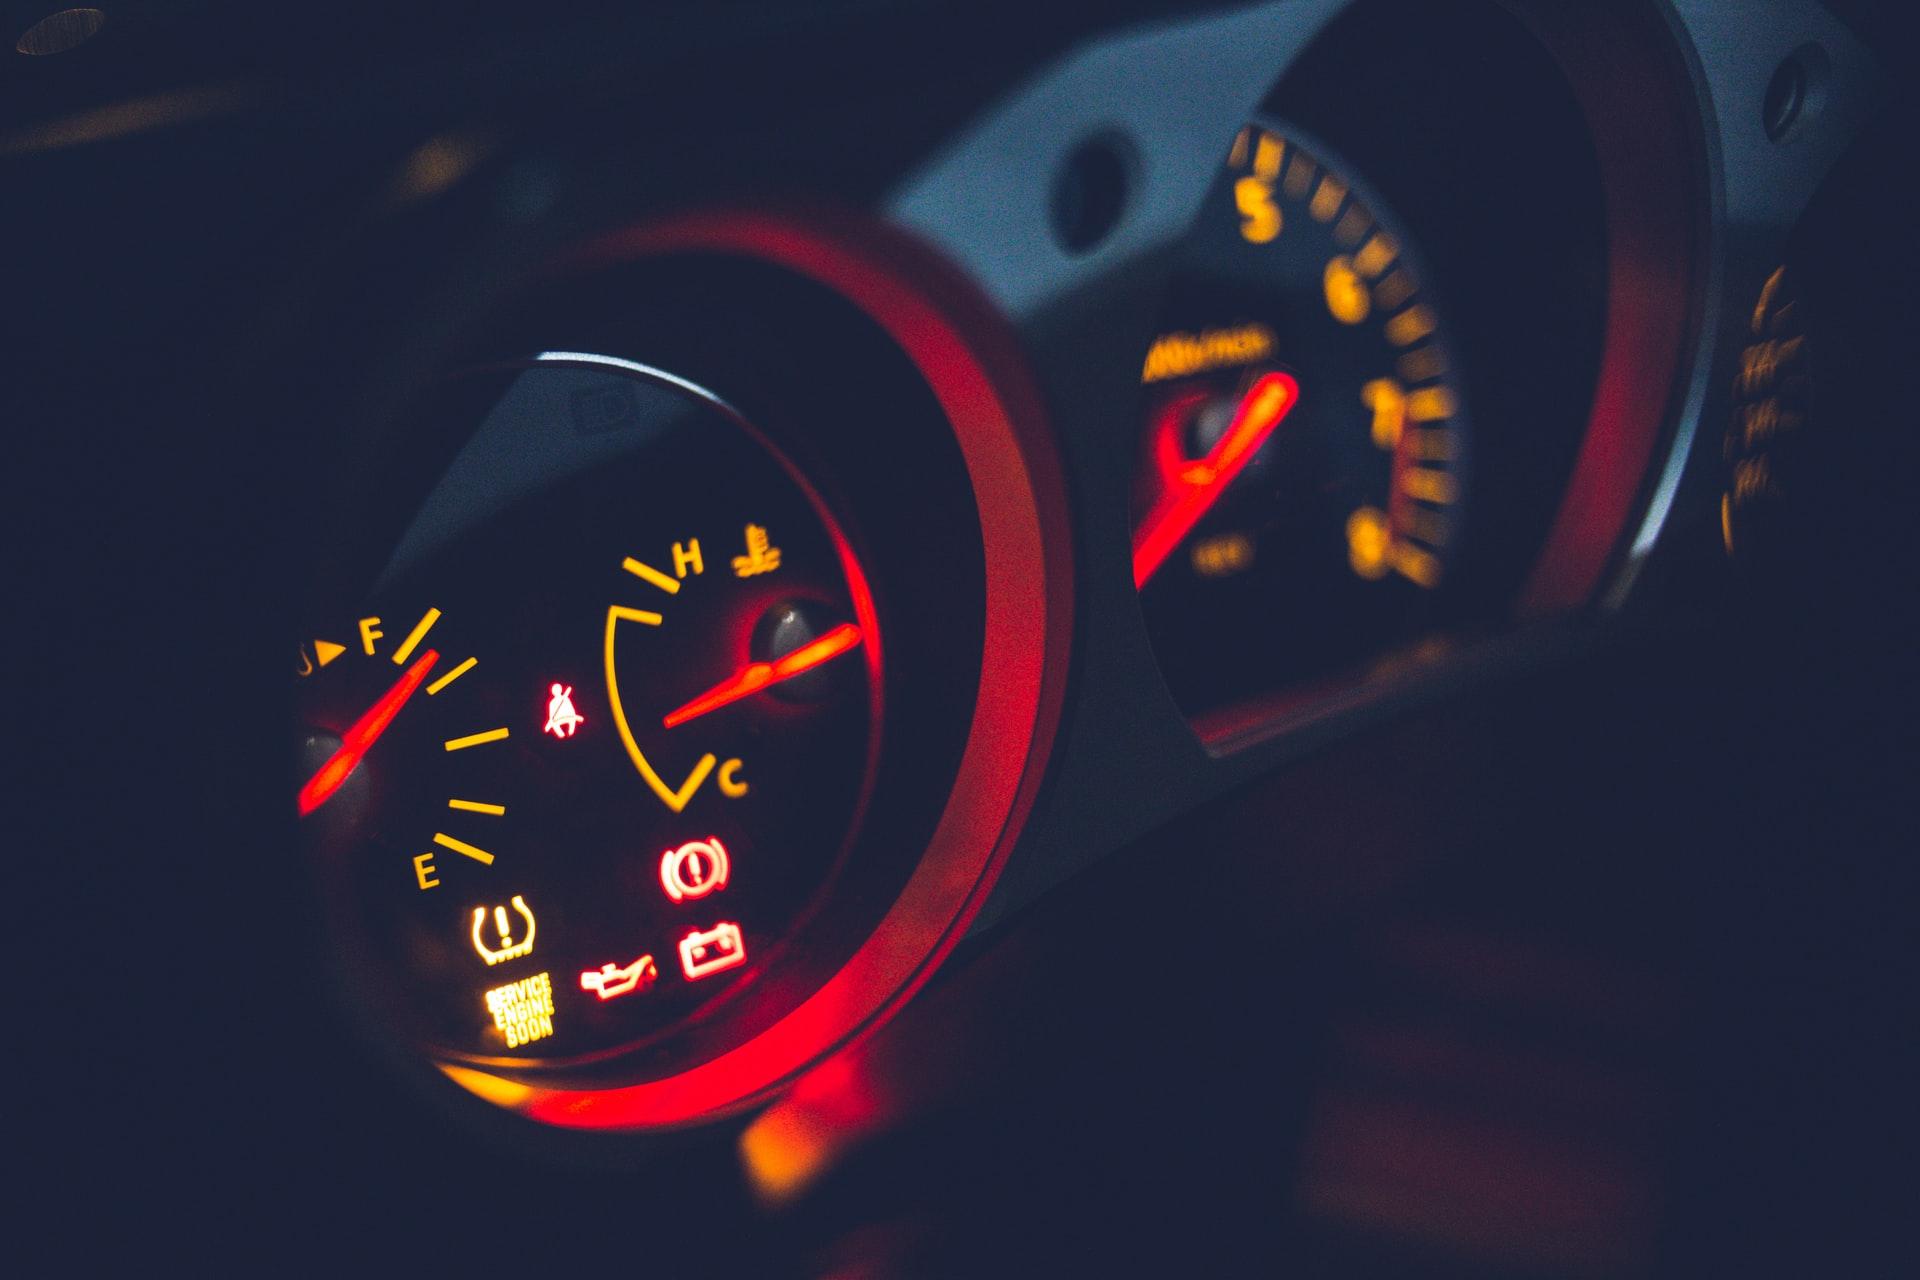 There are a few common issues that could make your car smell like gas.